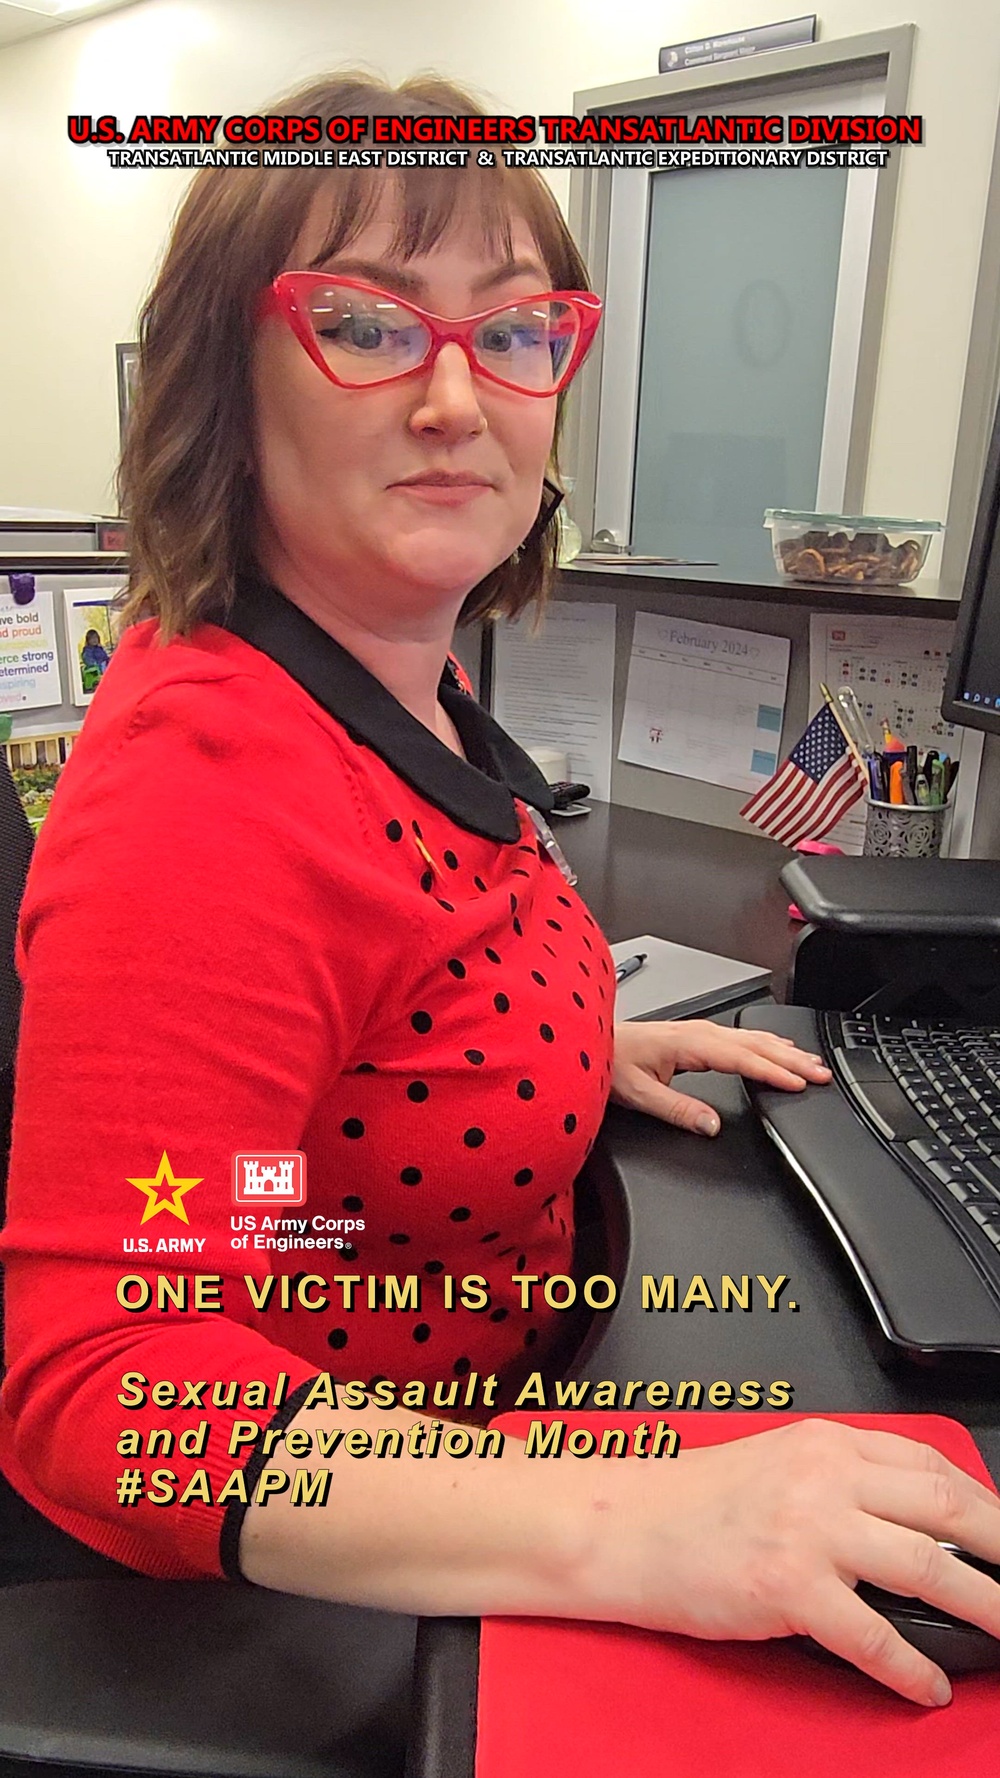 DVIDS – Video – Standing Together: U.S. Army Corps of Engineers Transatlantic Division Observes Sexual Assault Awareness and Prevention Month